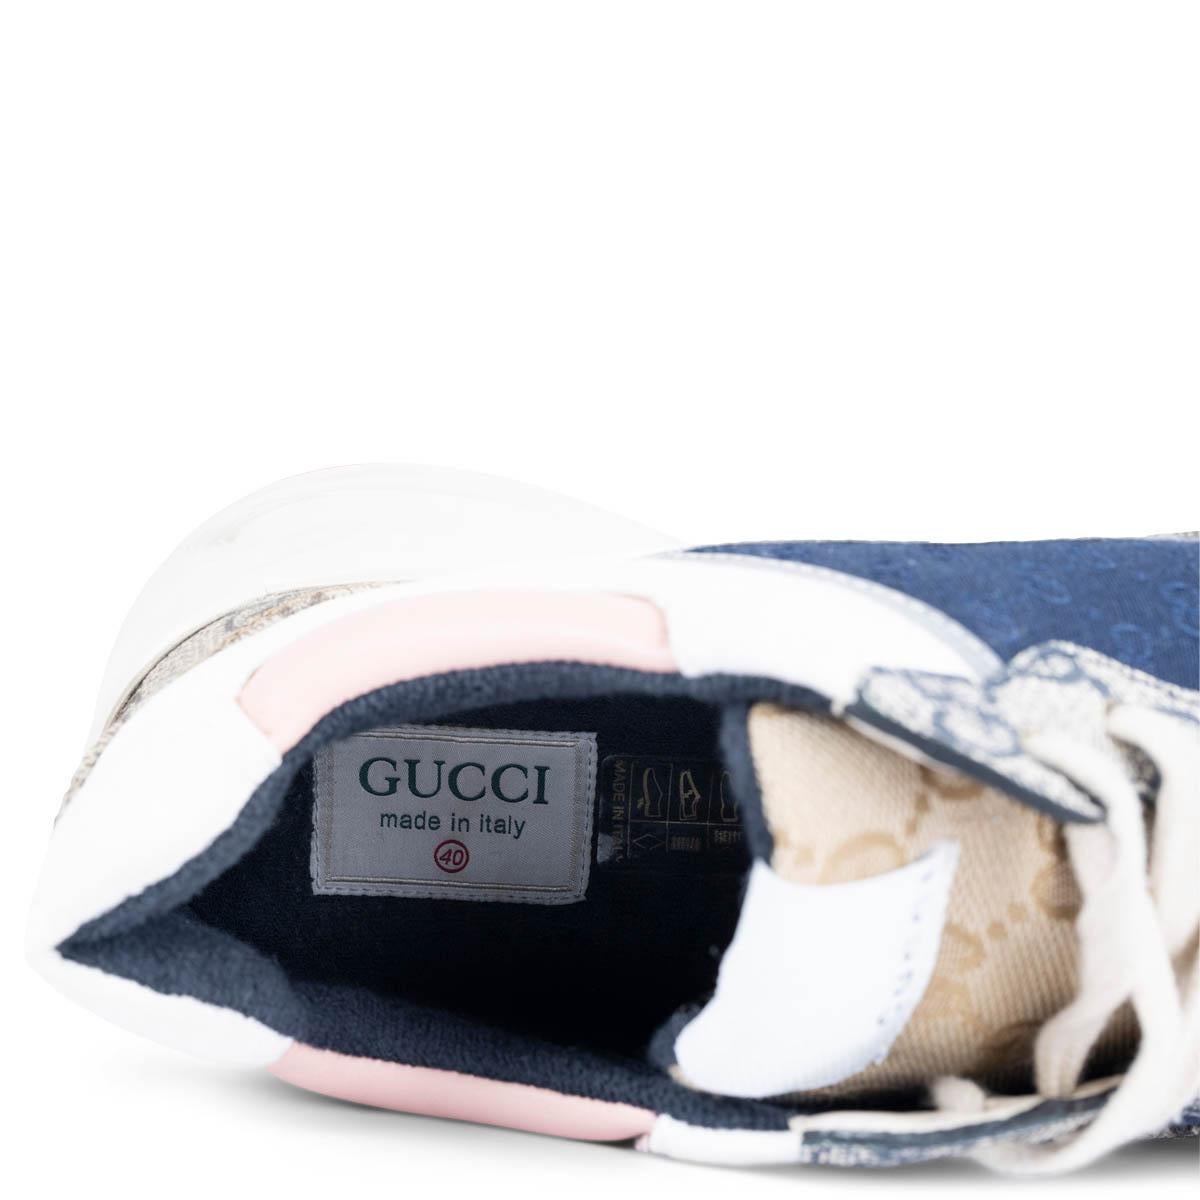 GUCCI tricolor canvas 2022 RHYTON GG MONOGRAM Sneakers Shoes 40 2